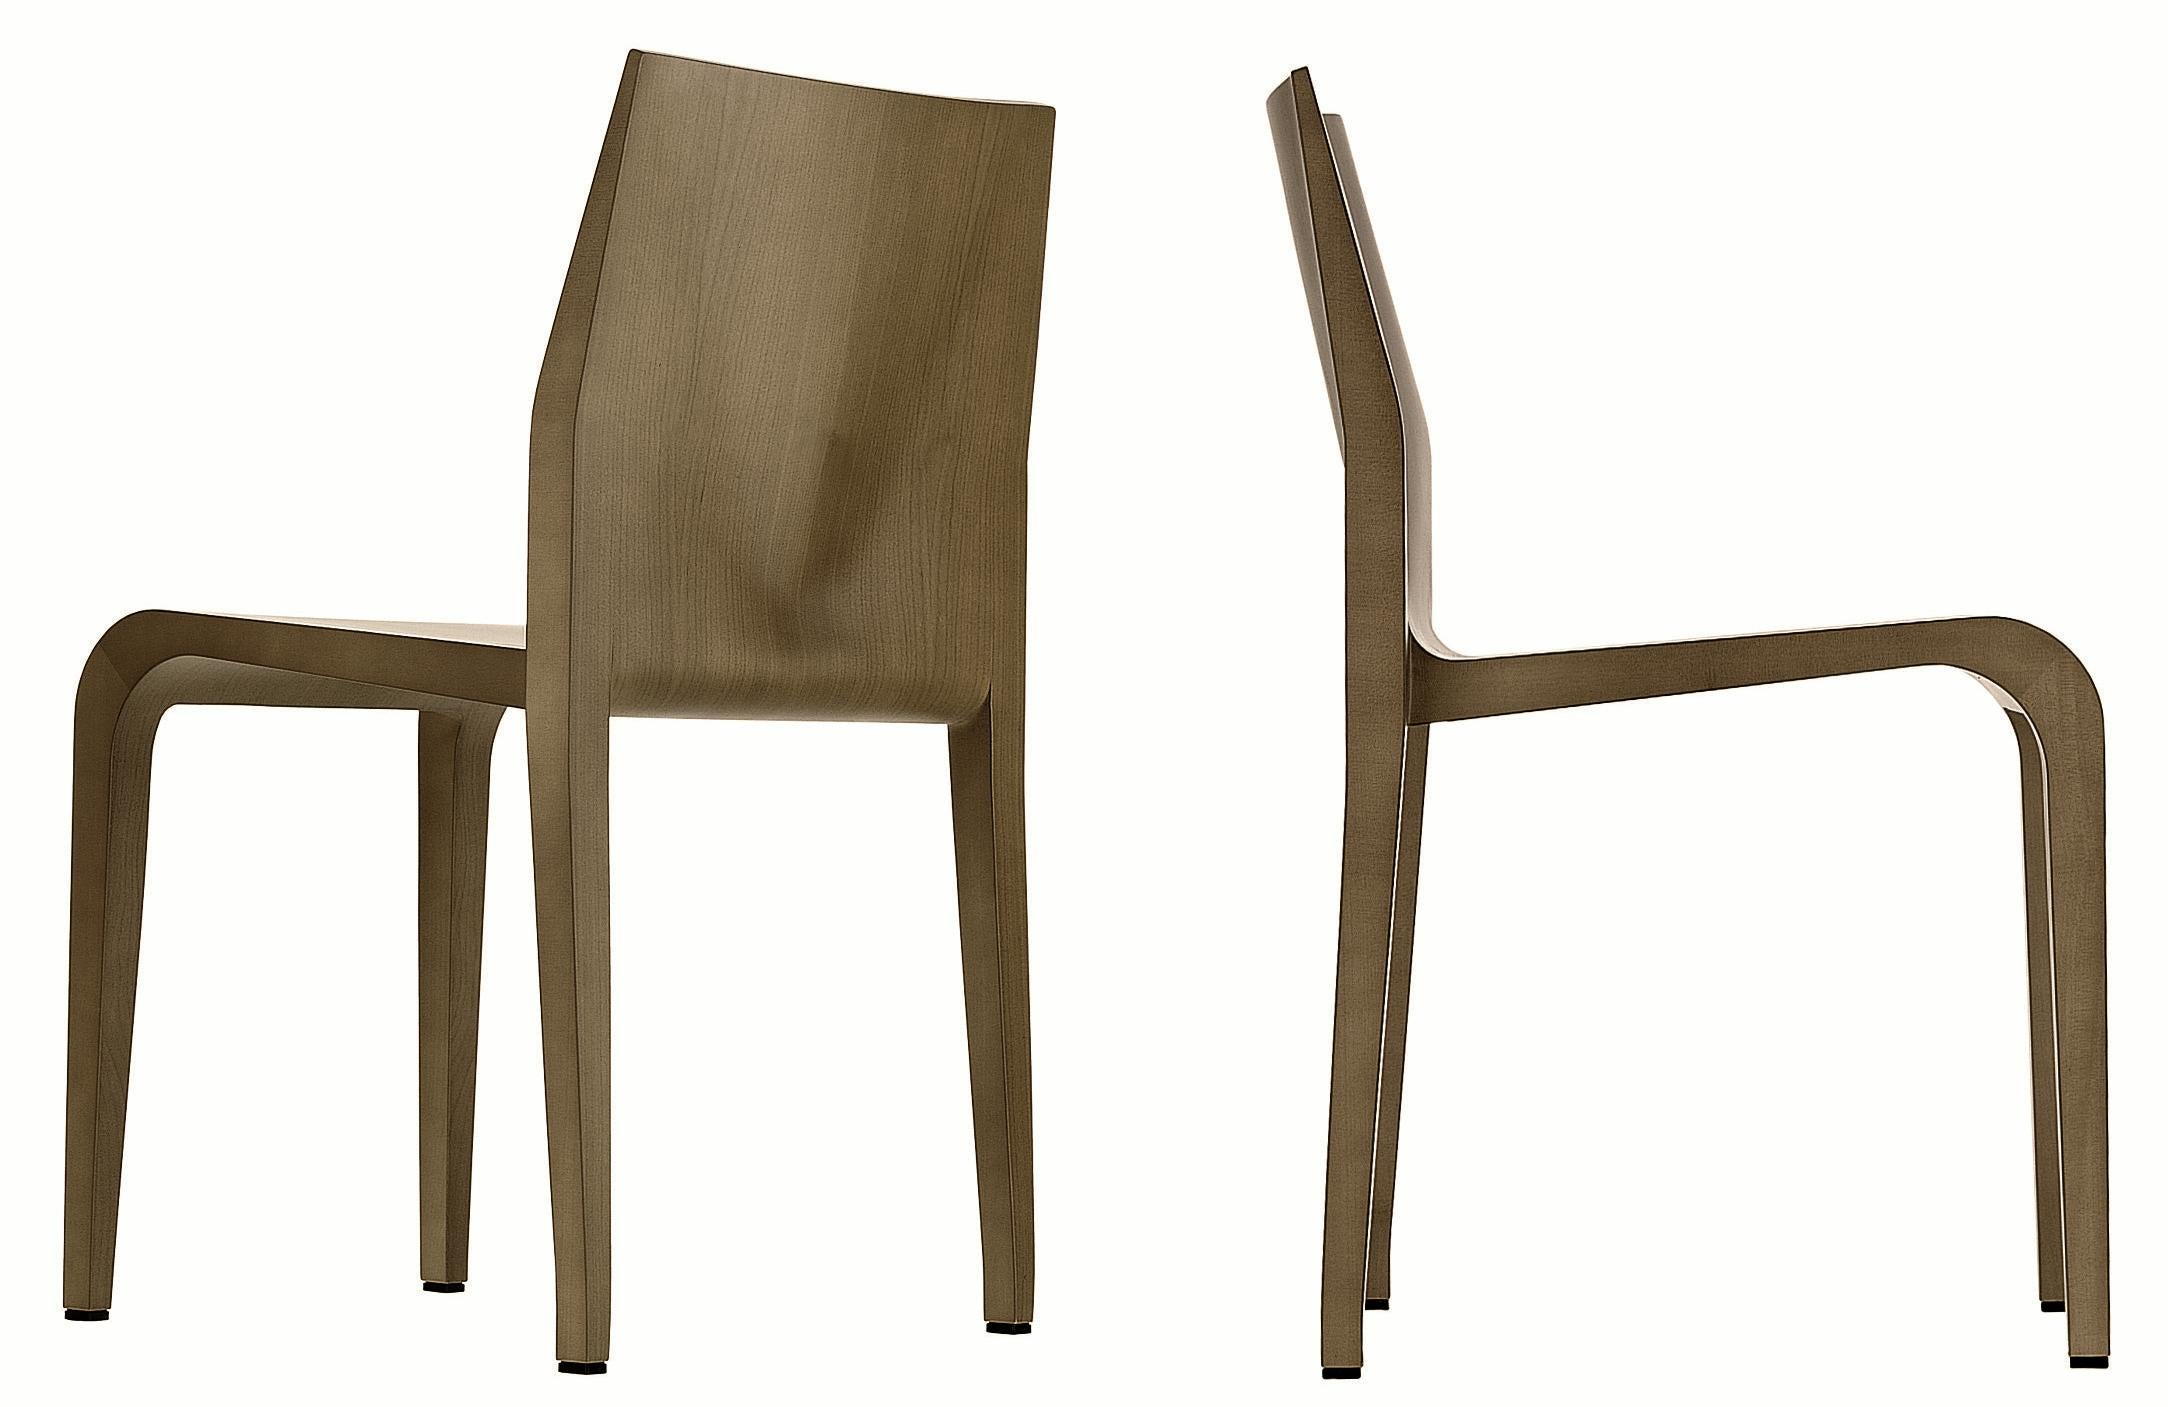 Alias 301 Laleggera Chair in Oak Canaletto Walnut Wood by Riccardo Blumer

Stacking chair with structure in solid maple or ash. Maple veneer or oak veneer. Internal support in injected polyurethane foam. Finish in transparent laquage or in colored